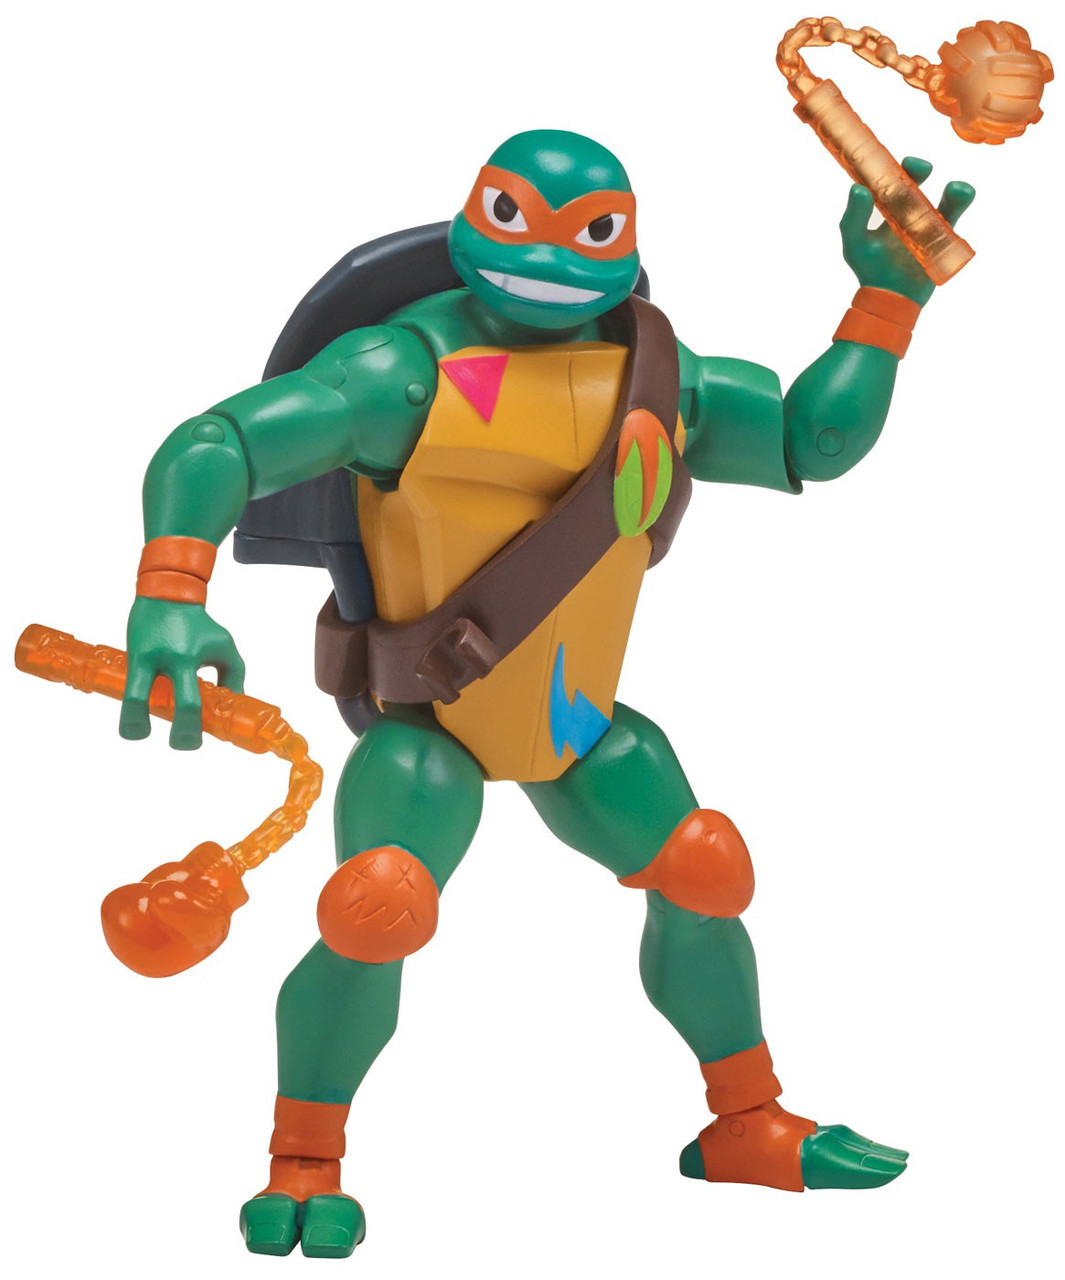 rise of the tmnt battle shell